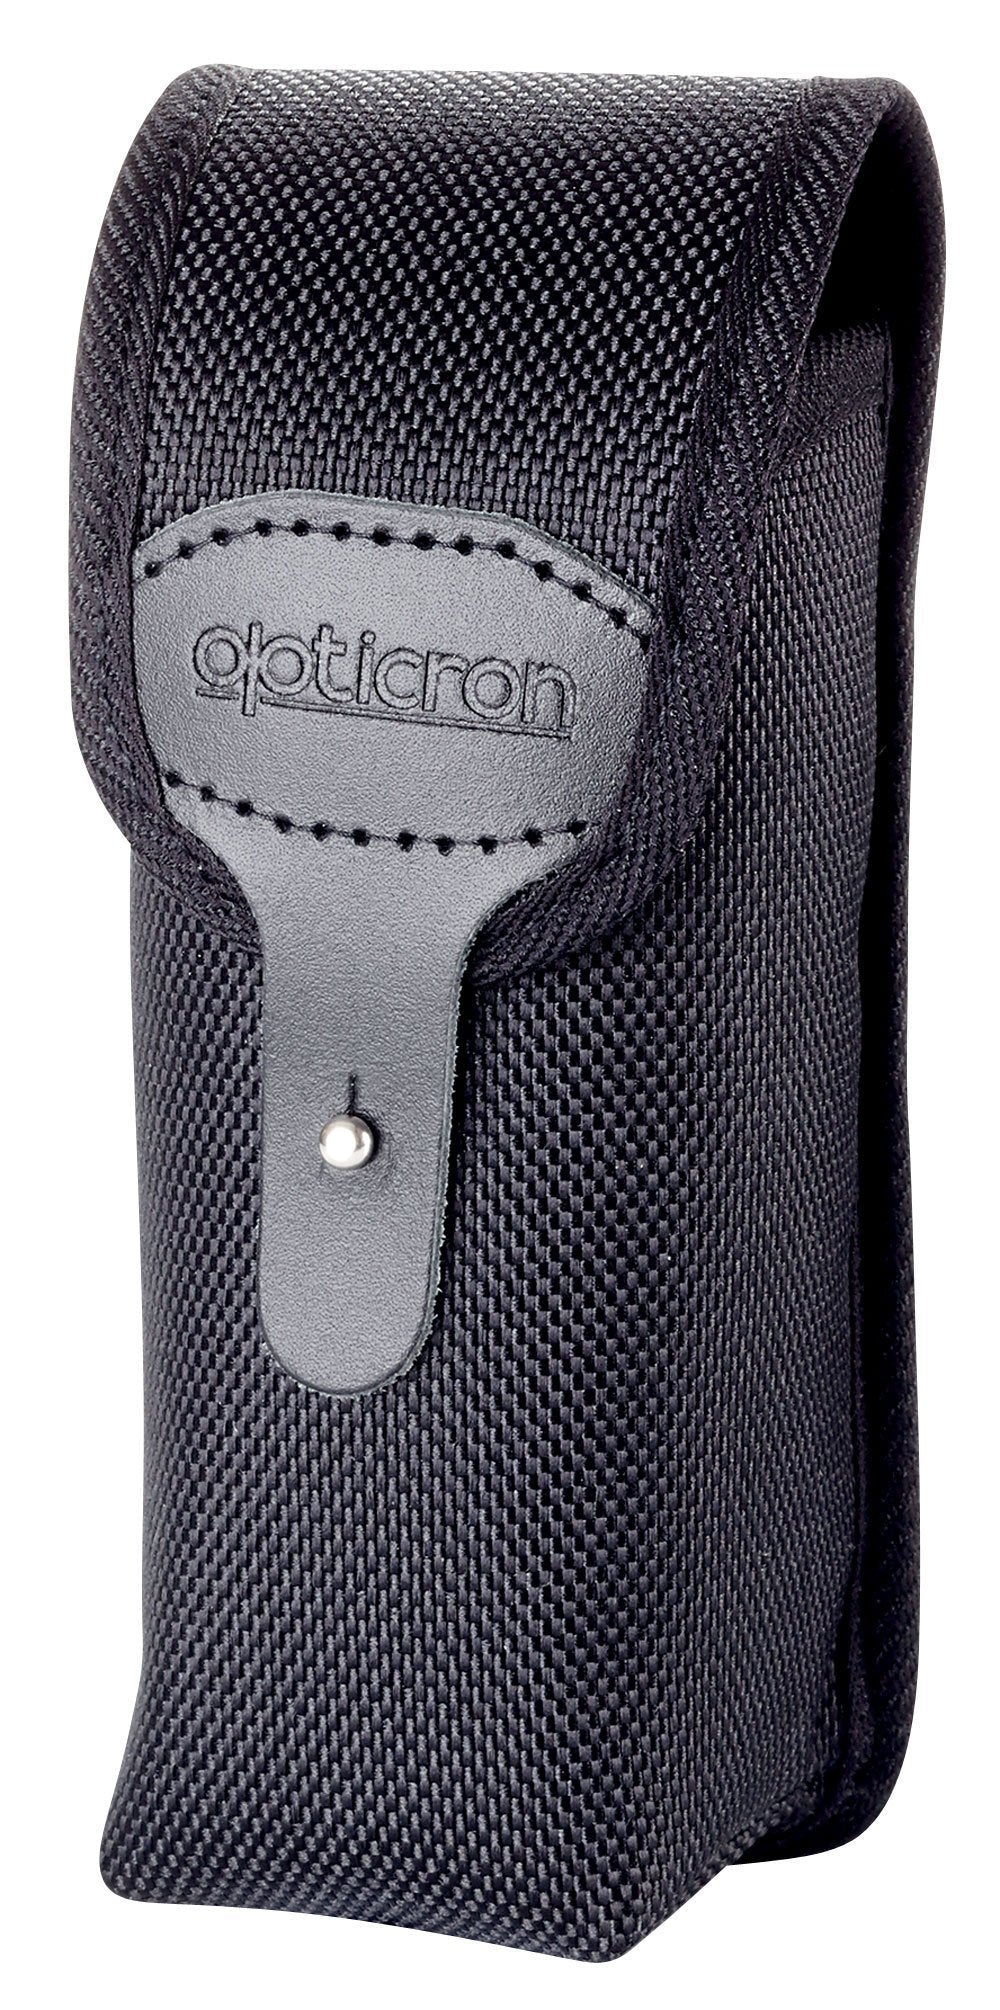 Opticron Monocular Case - Soft Canvas & Leather. Internal Dimensions 5.3x1.9x1.9 inches Monocular 5.3x1.9x1.9 inches